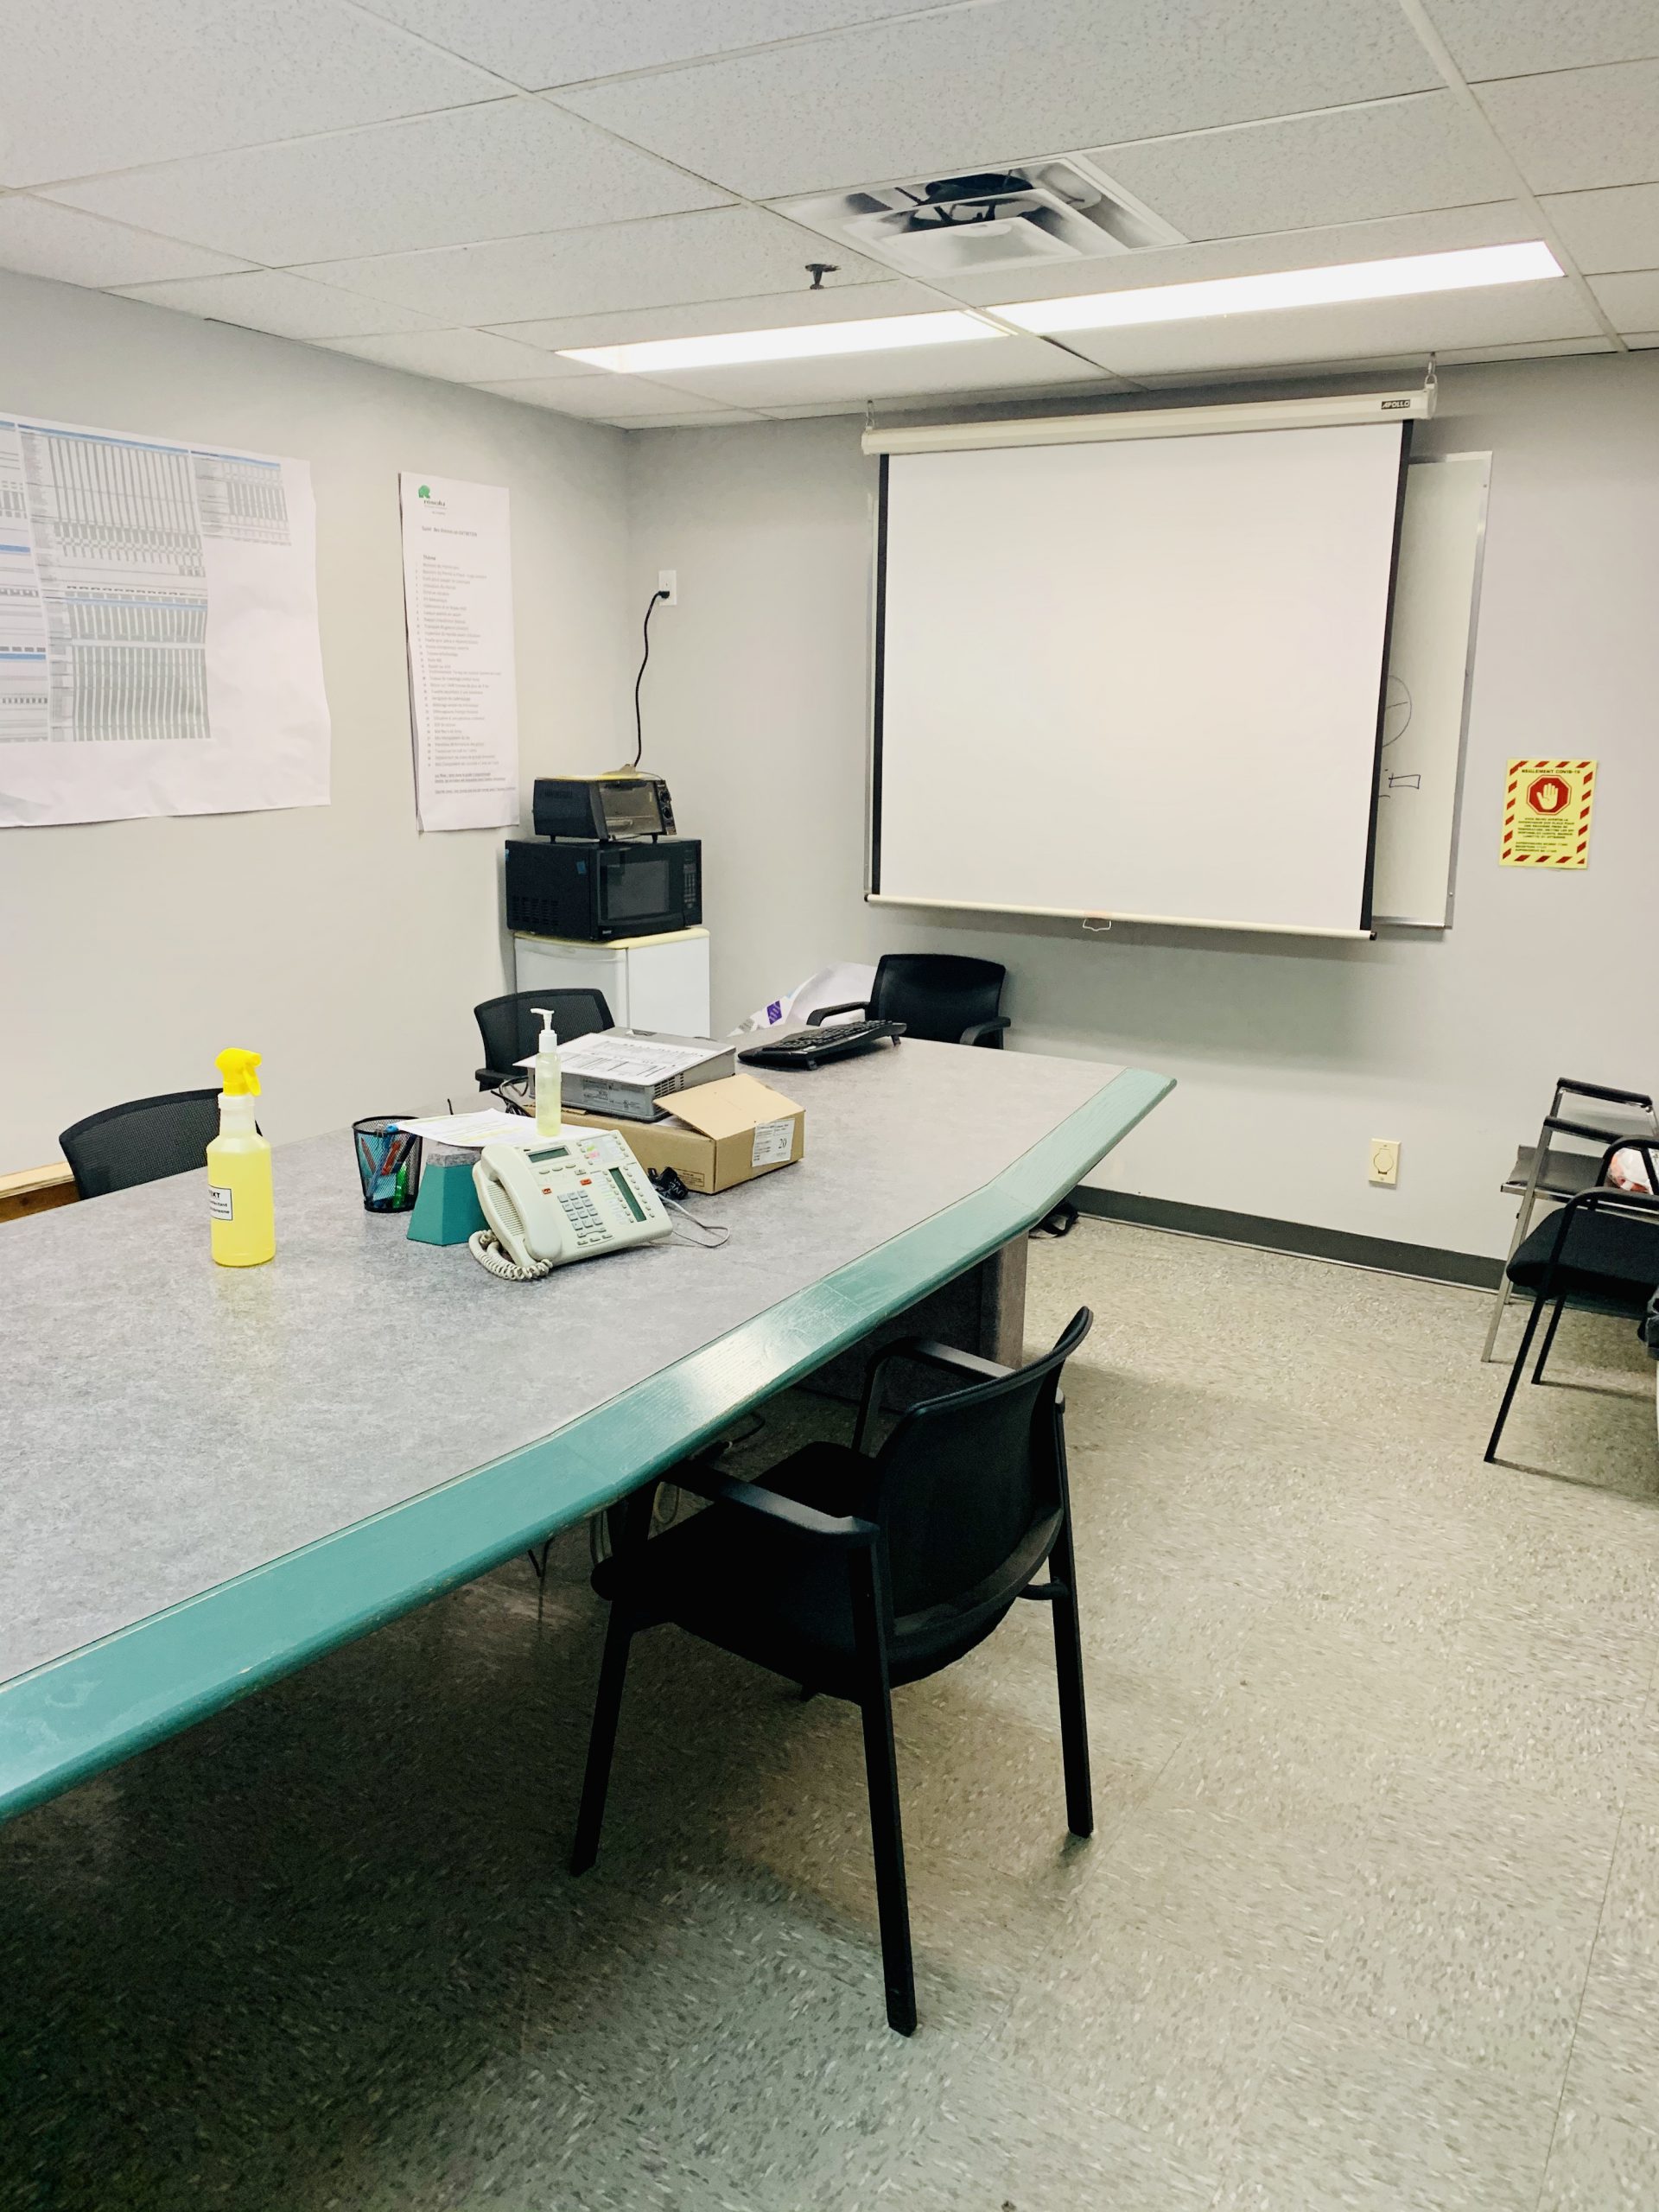 The conference room, where internal meetings will take place. 